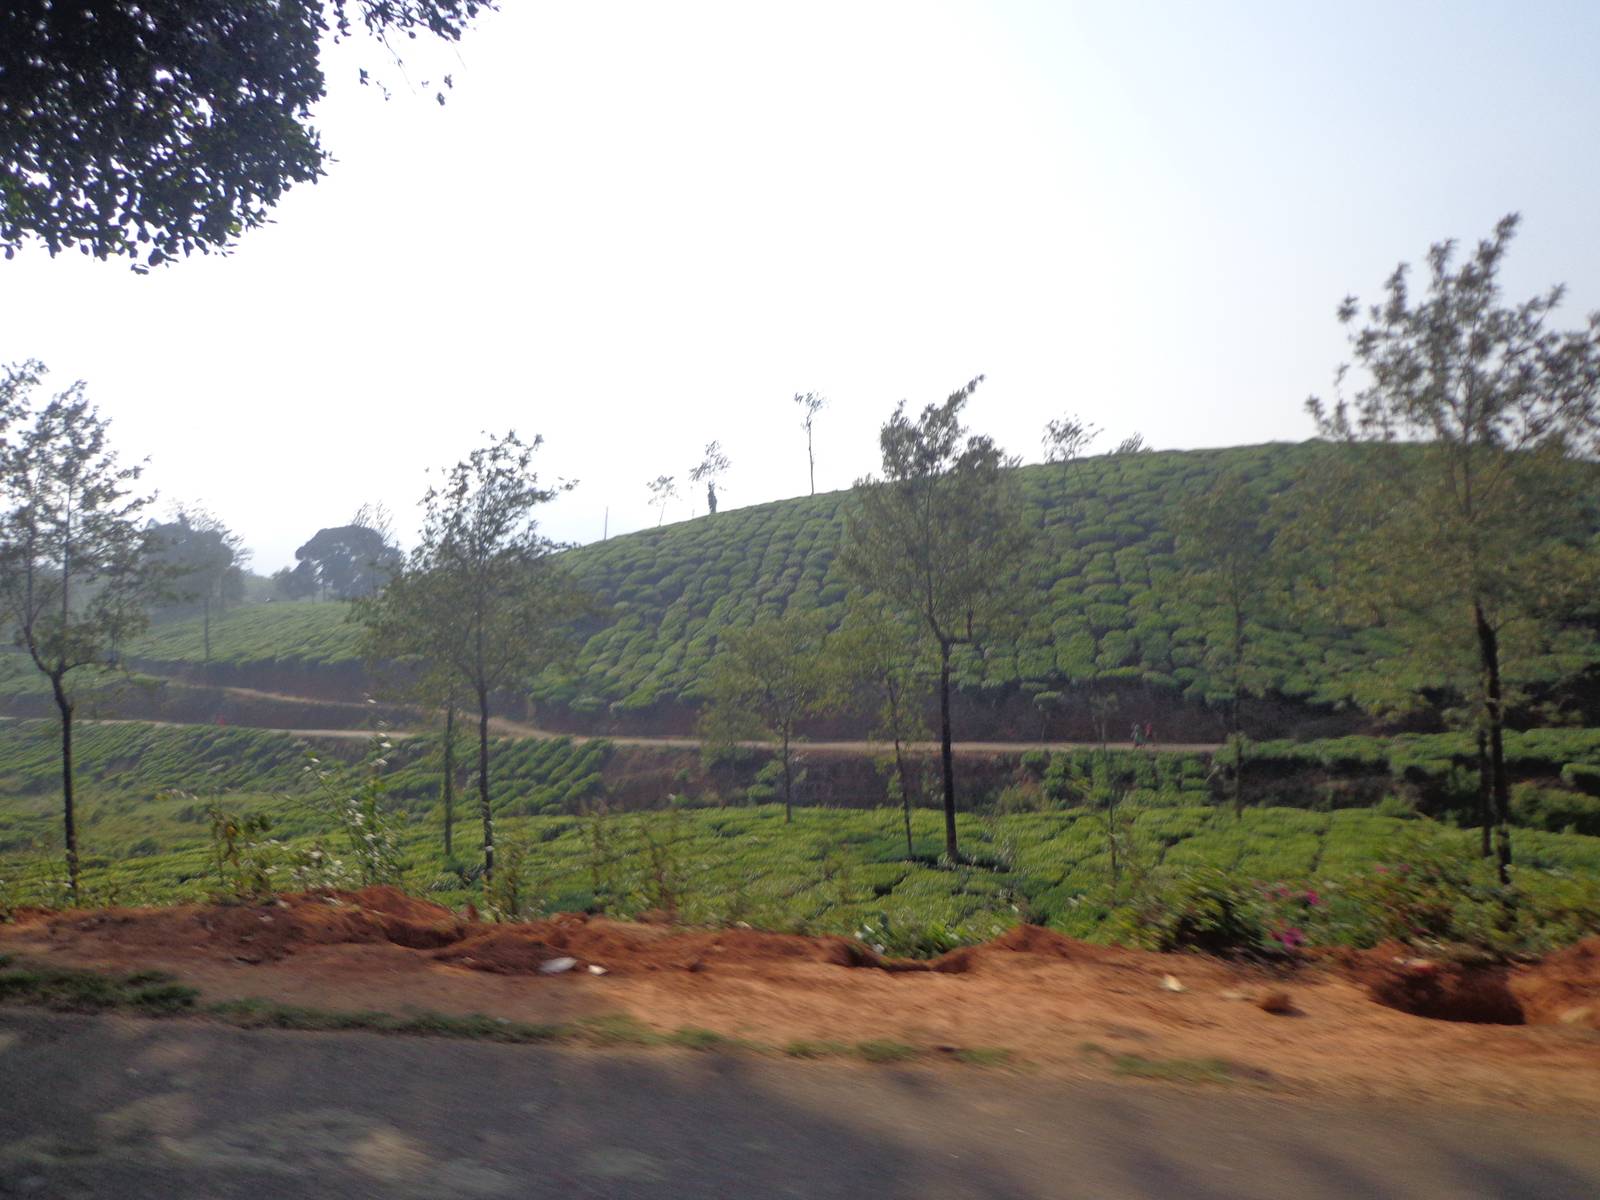 Most of the tea estates nearby were owned by Harrisons Malayalam Ltd.